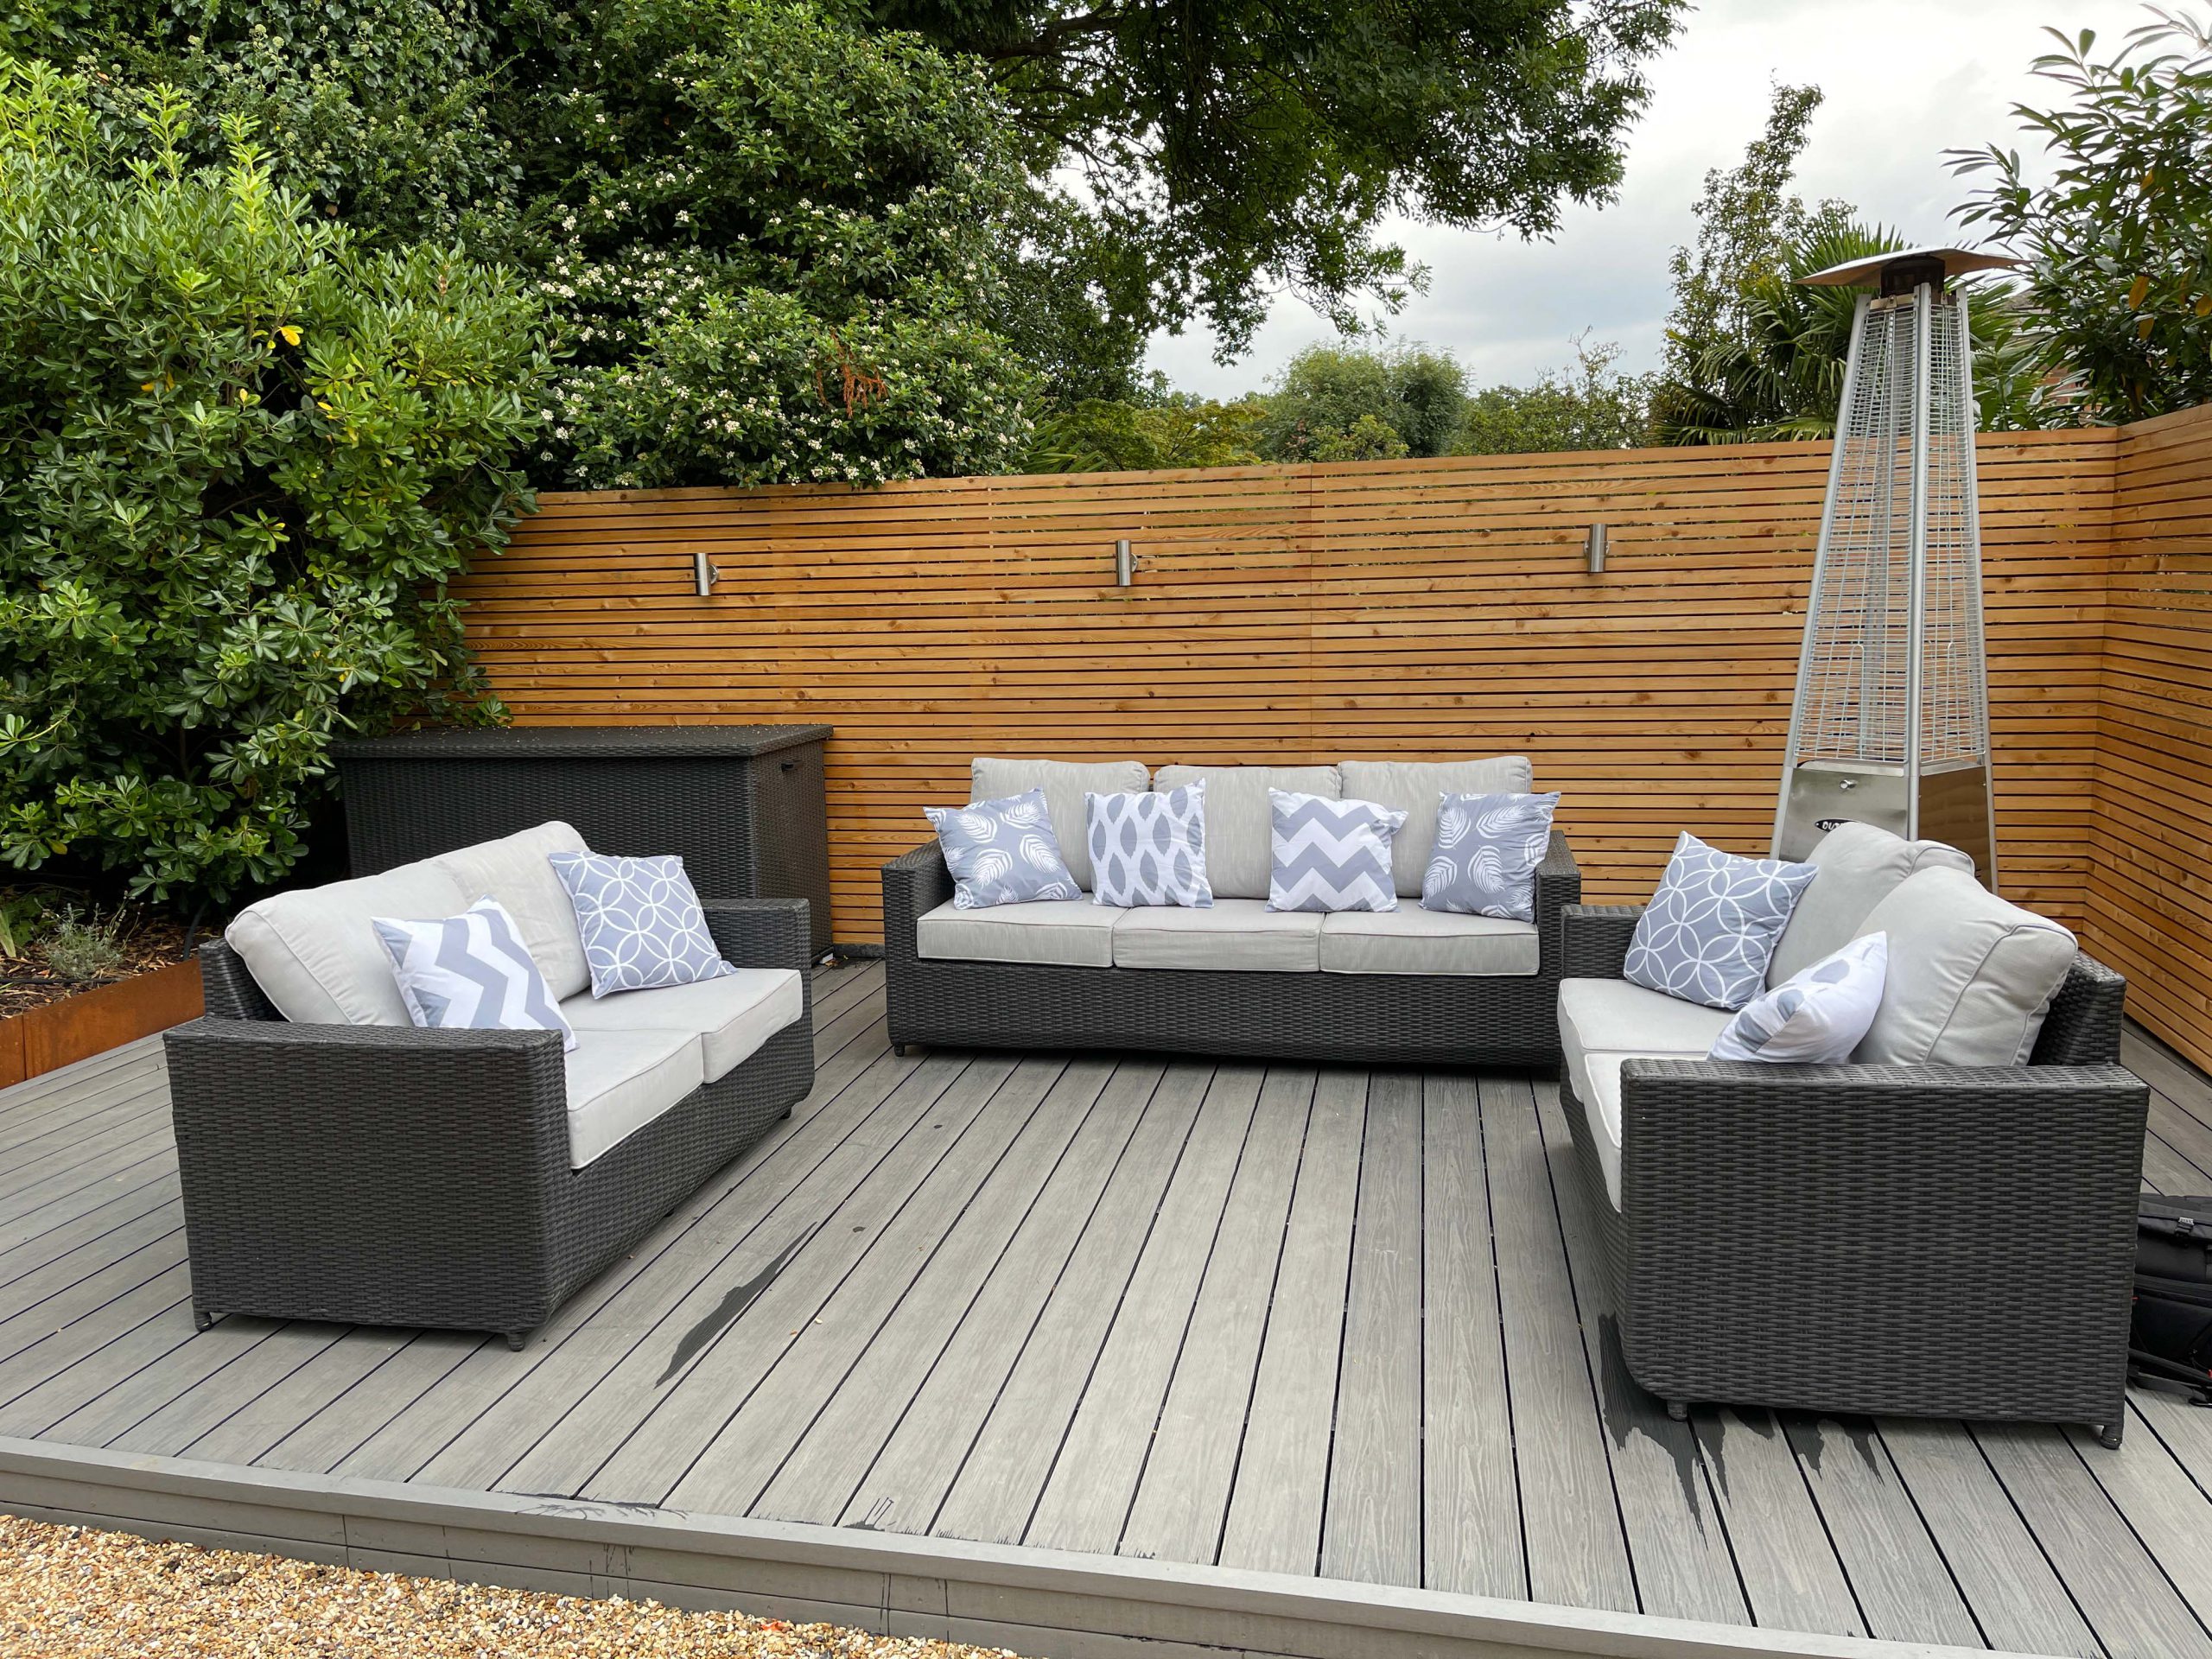 Well laid out seating area with a heater on some modern grey sustainable composite decking